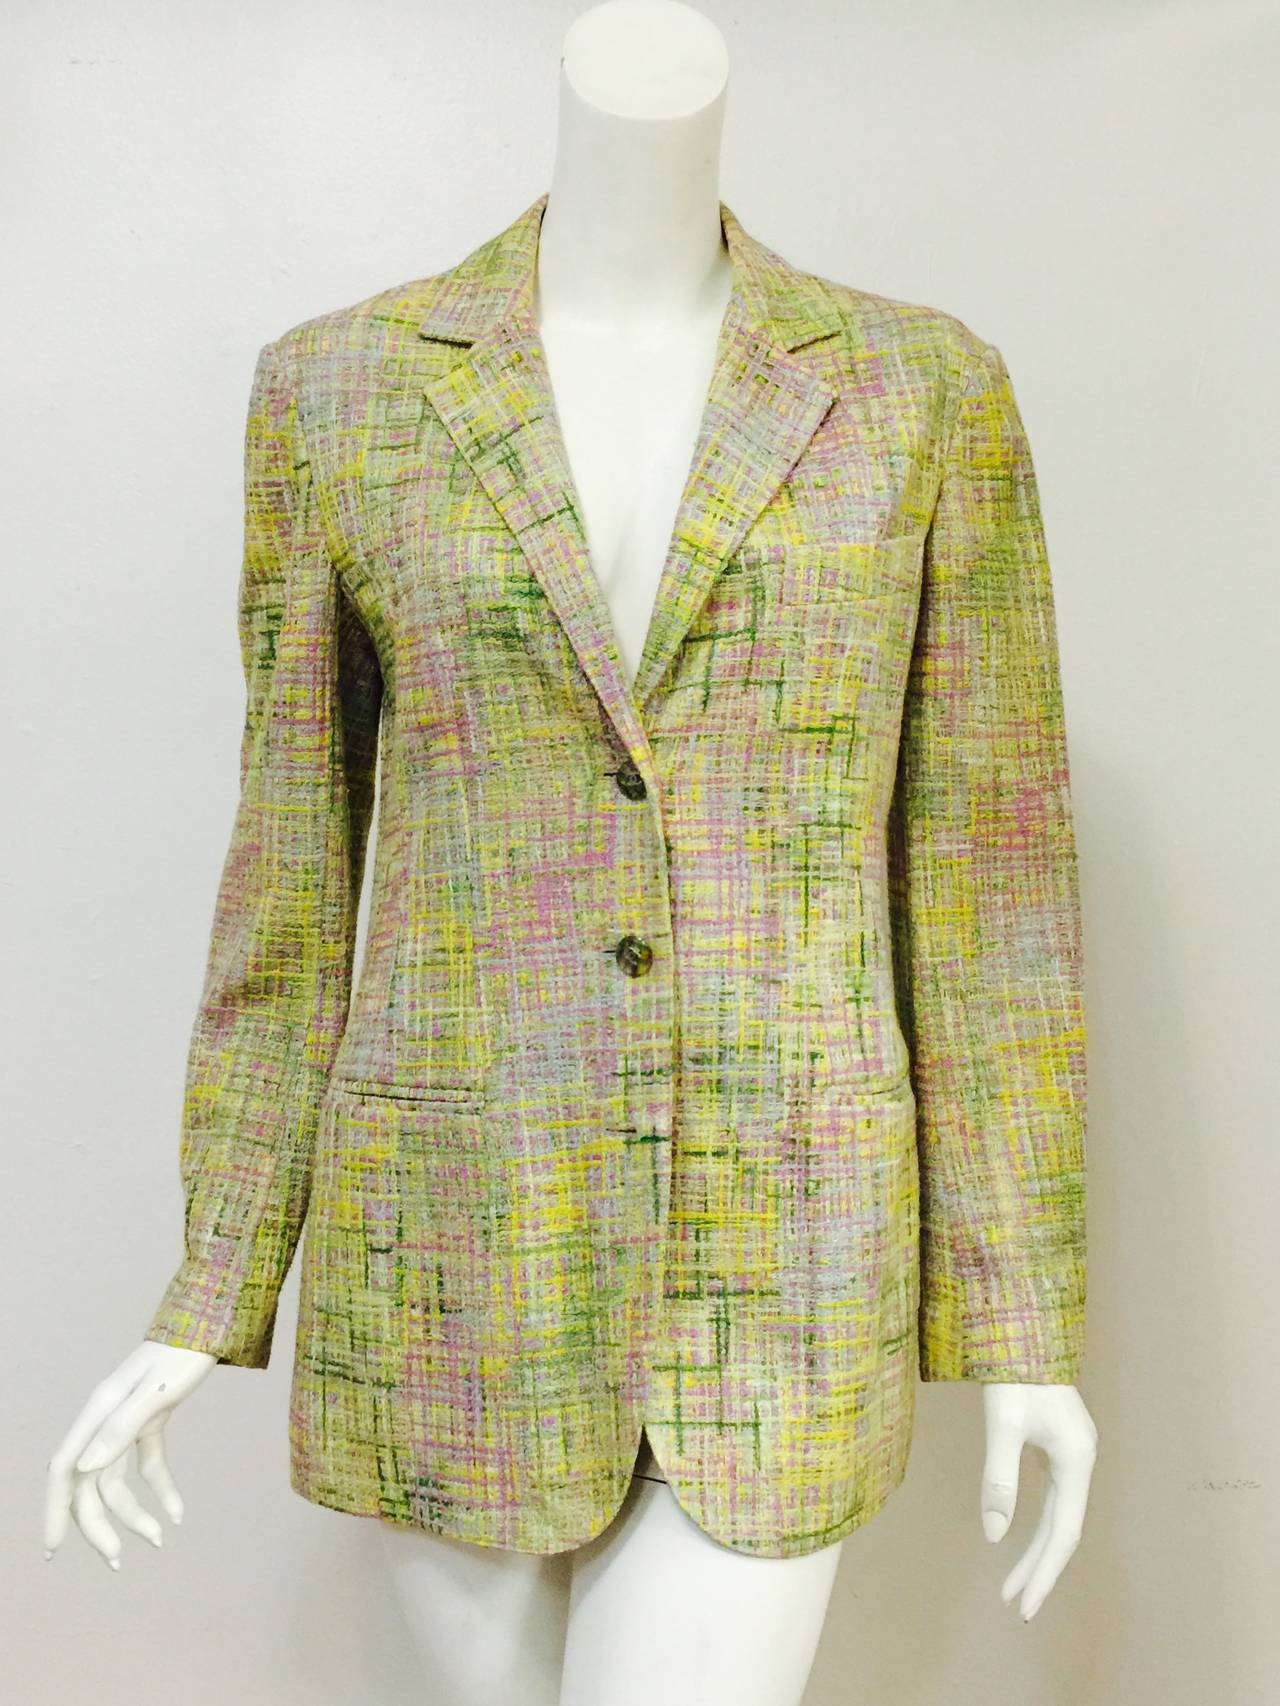 Chanel 1998 Spring Tweed Boyfriend Jacket is strong enough for an homme but made for a femme!  Features exquisite cotton blend fabric and fine tailoring techniques associated with the most celebrated menswear designers.  Primarily citrus yellow,